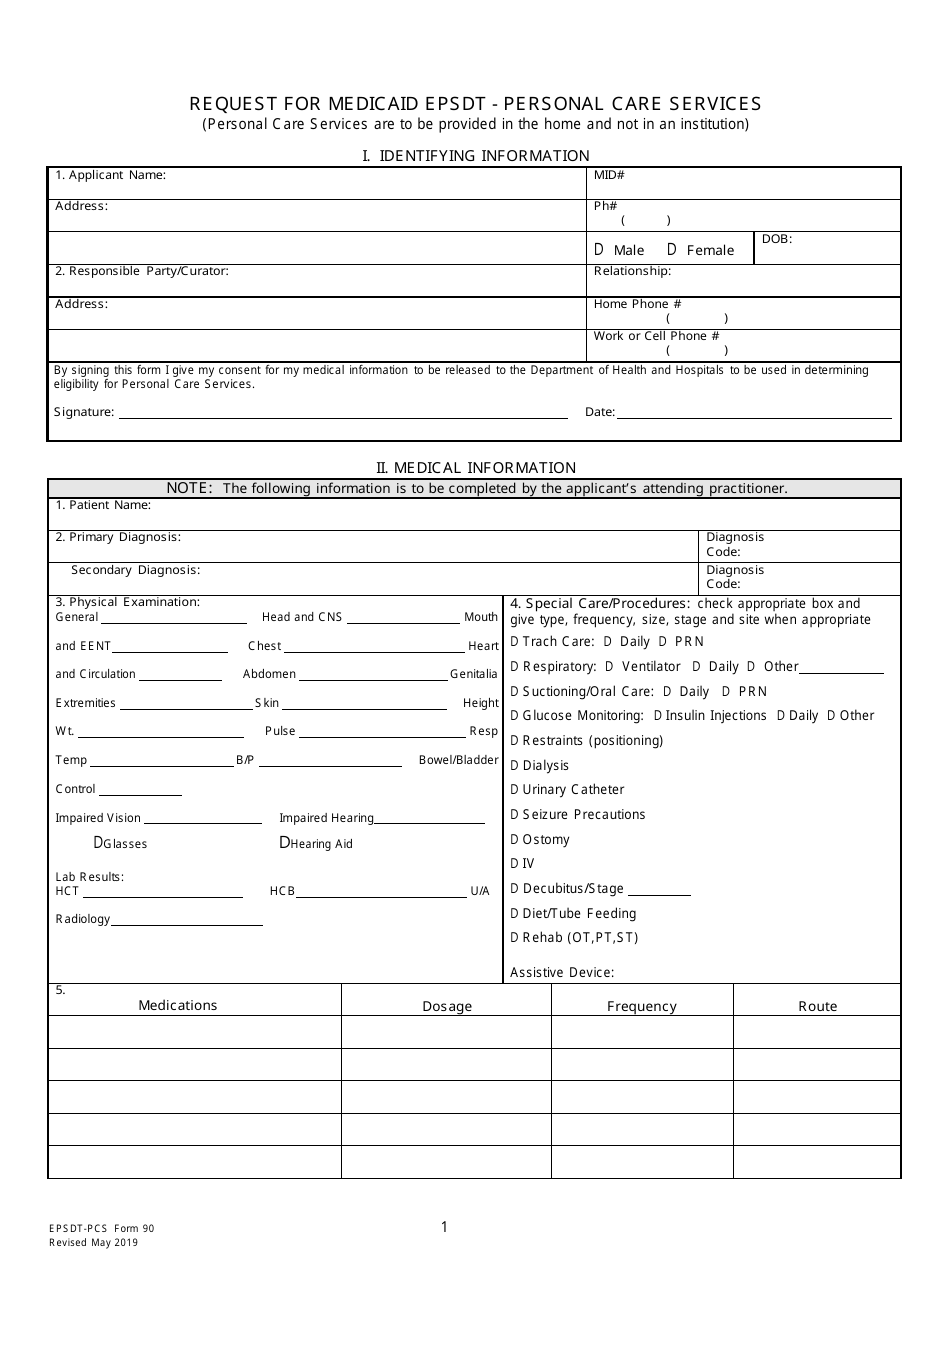 EPSDT-PCS Form 90 Request for Medicaid Epsdt - Personal Care Services - Louisiana, Page 1